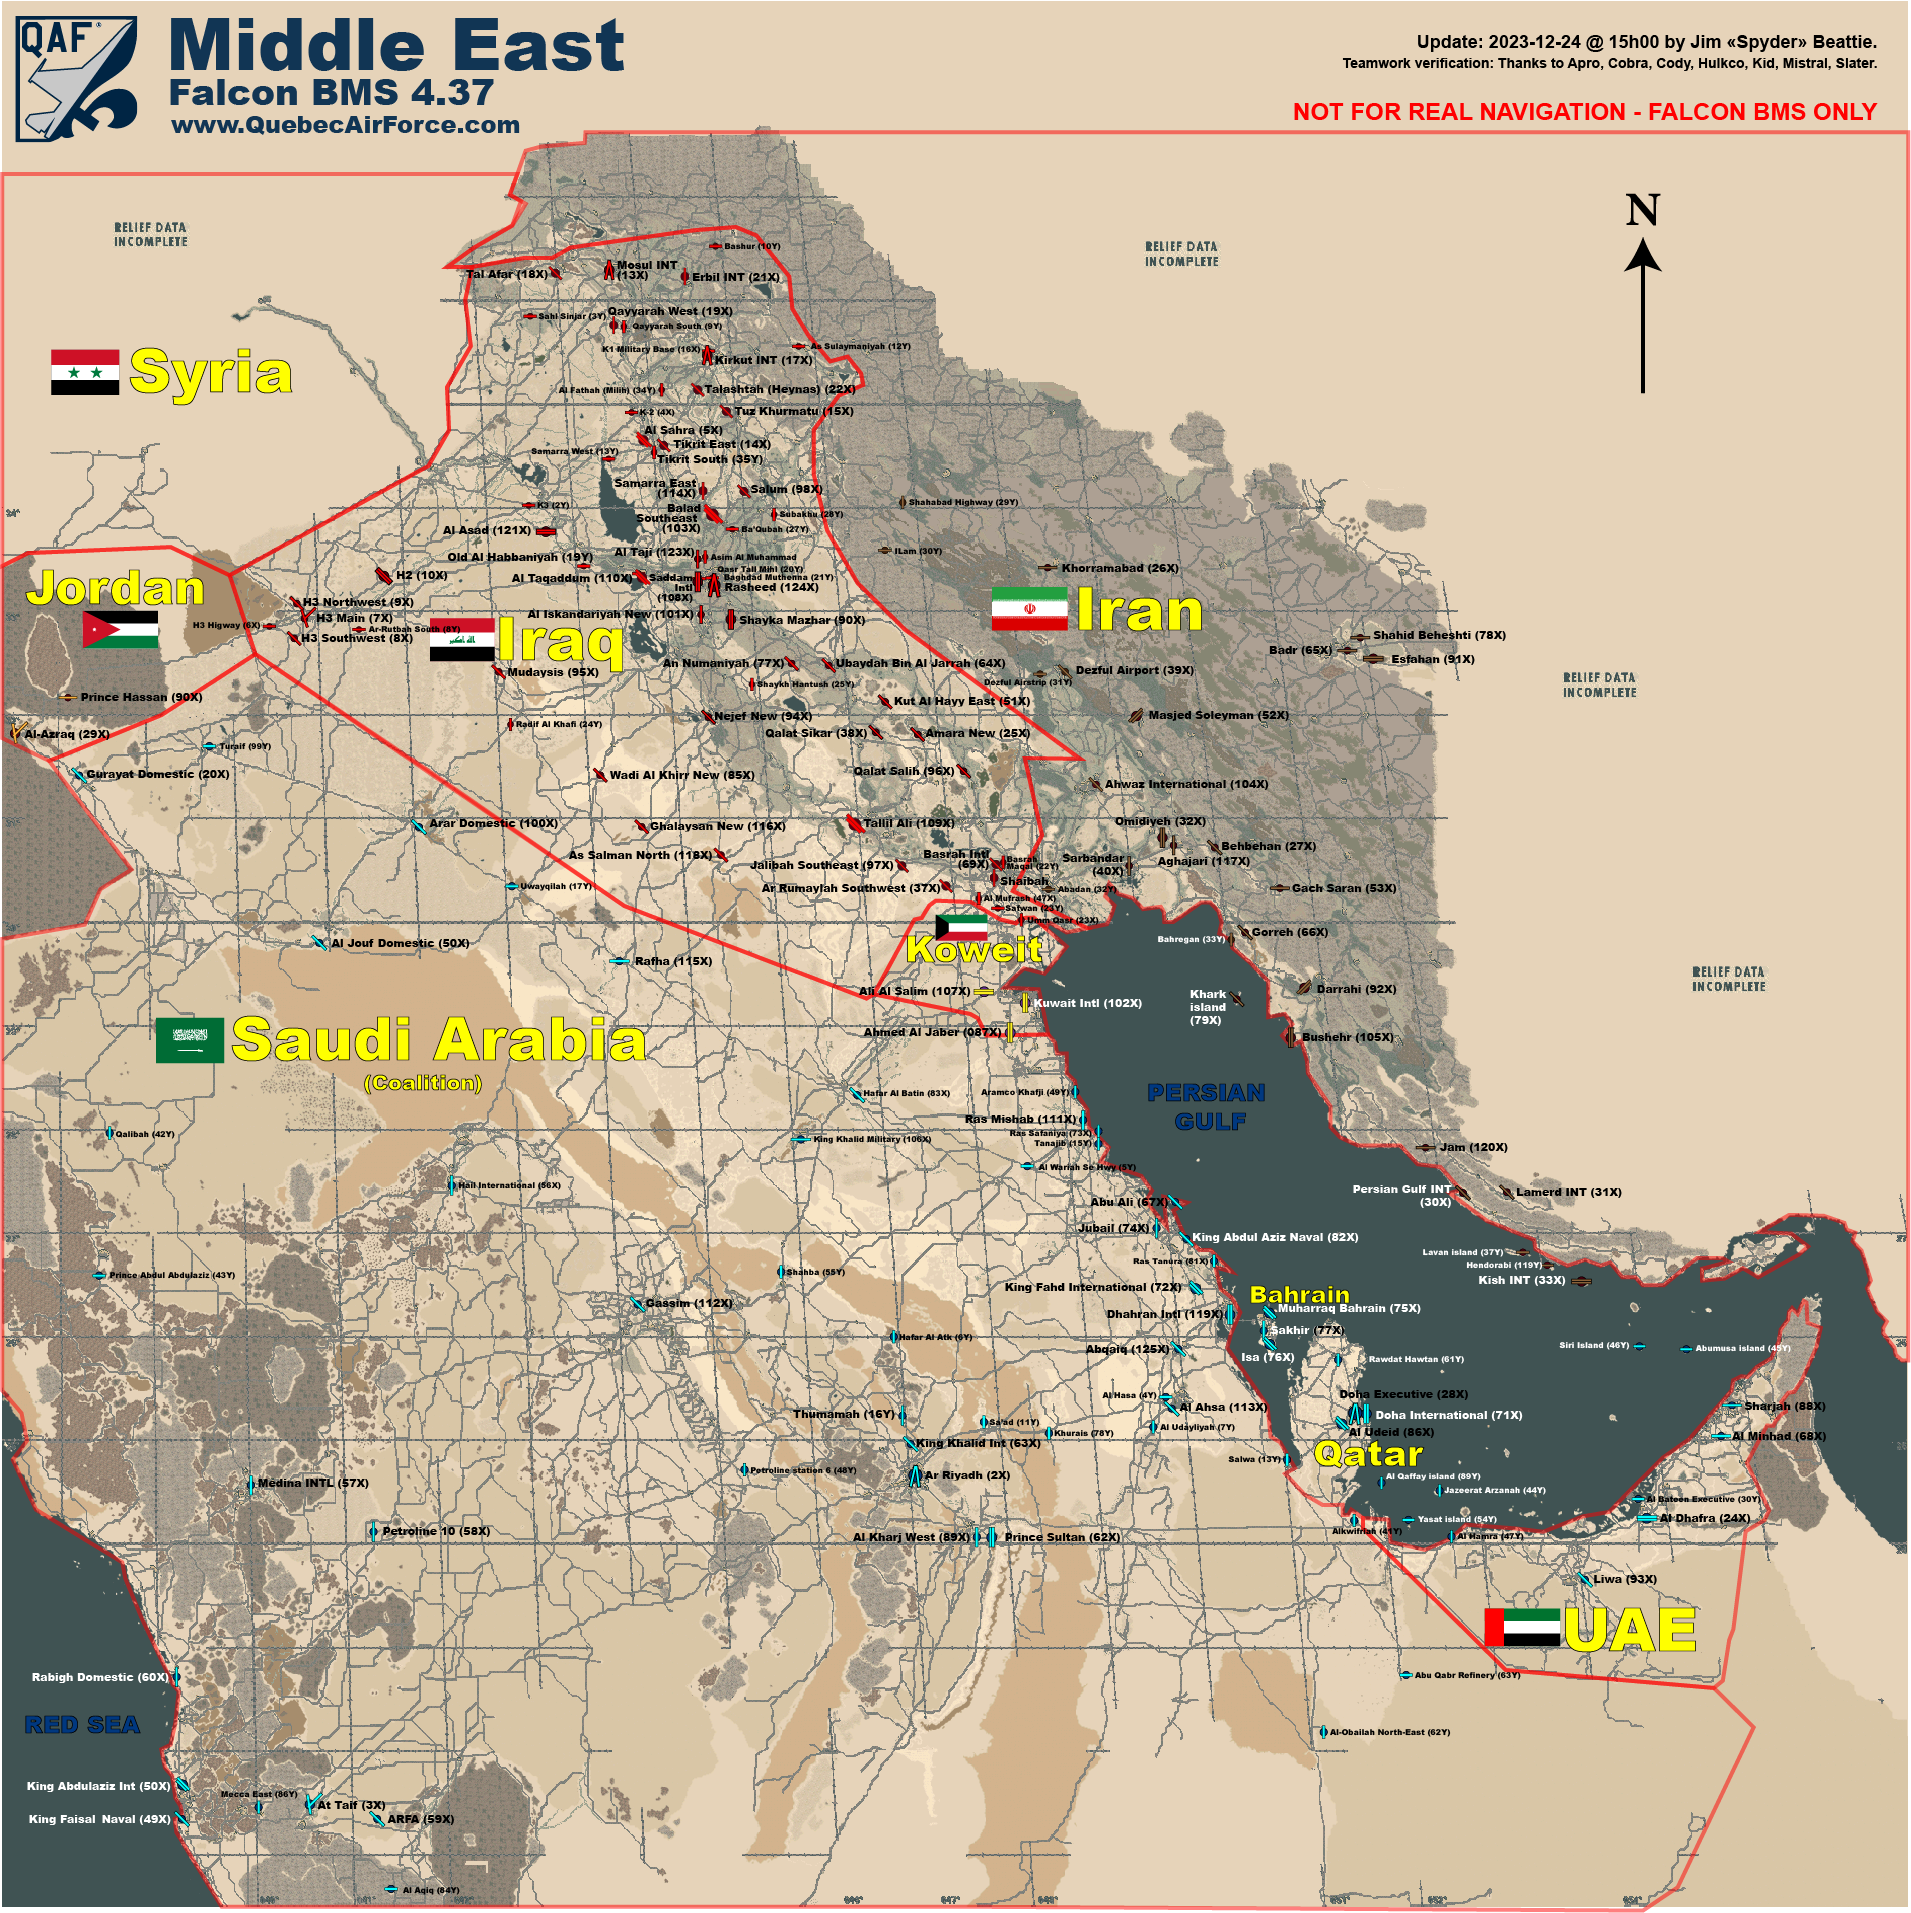 Middle East Theater Map (QAF)